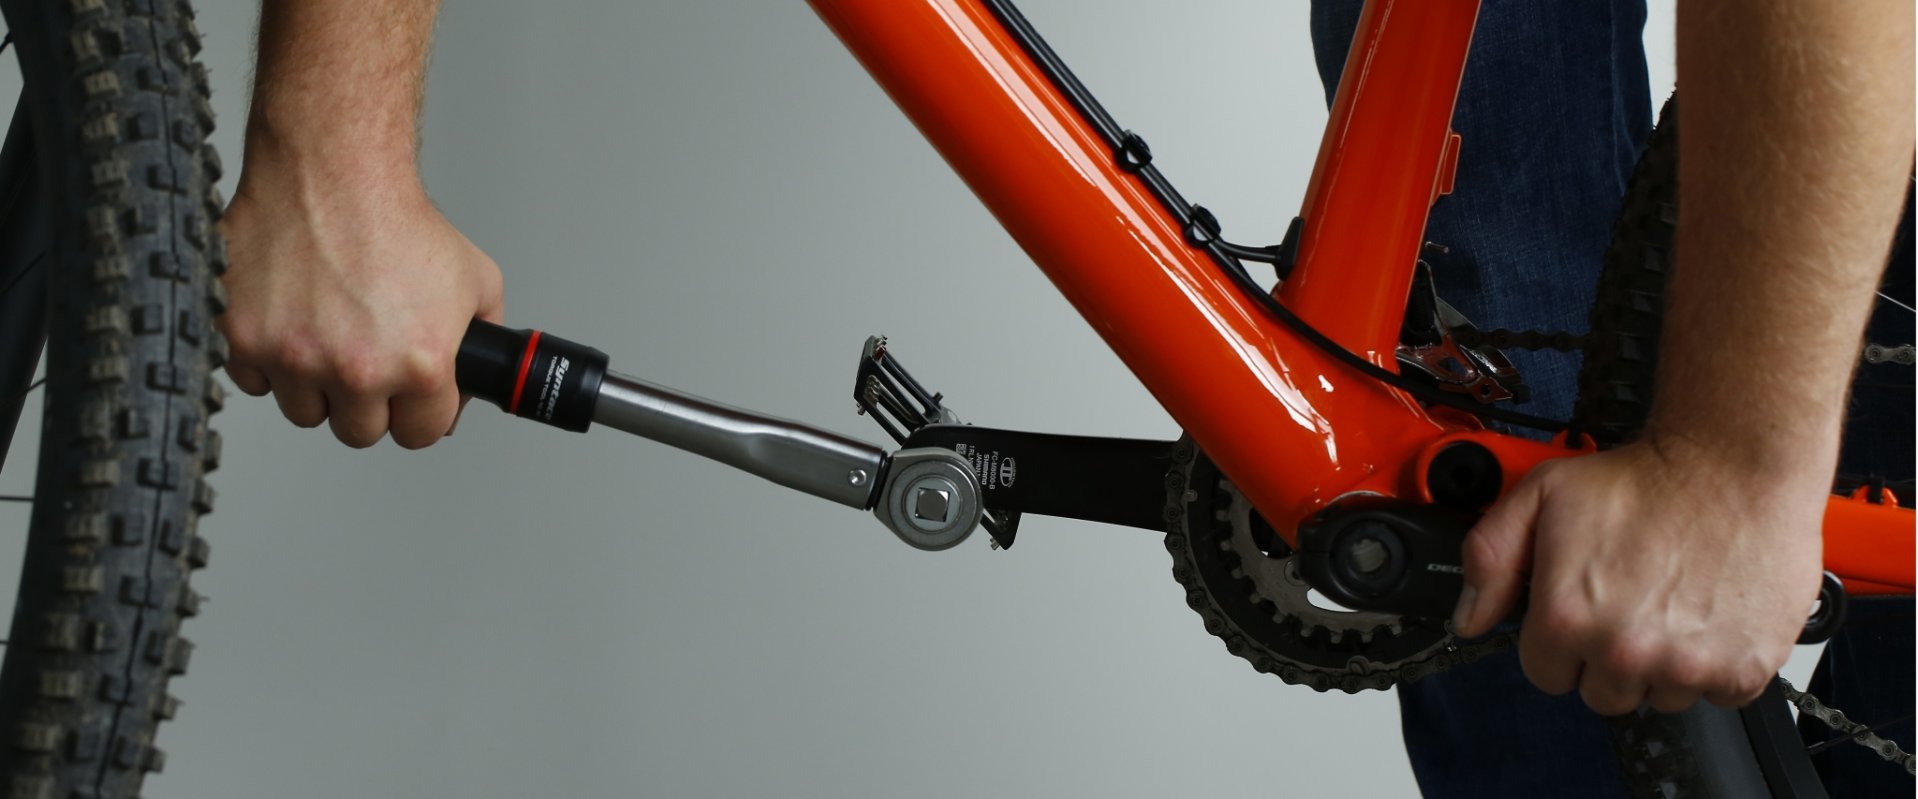 Use a torqure wrench to finish tightening.